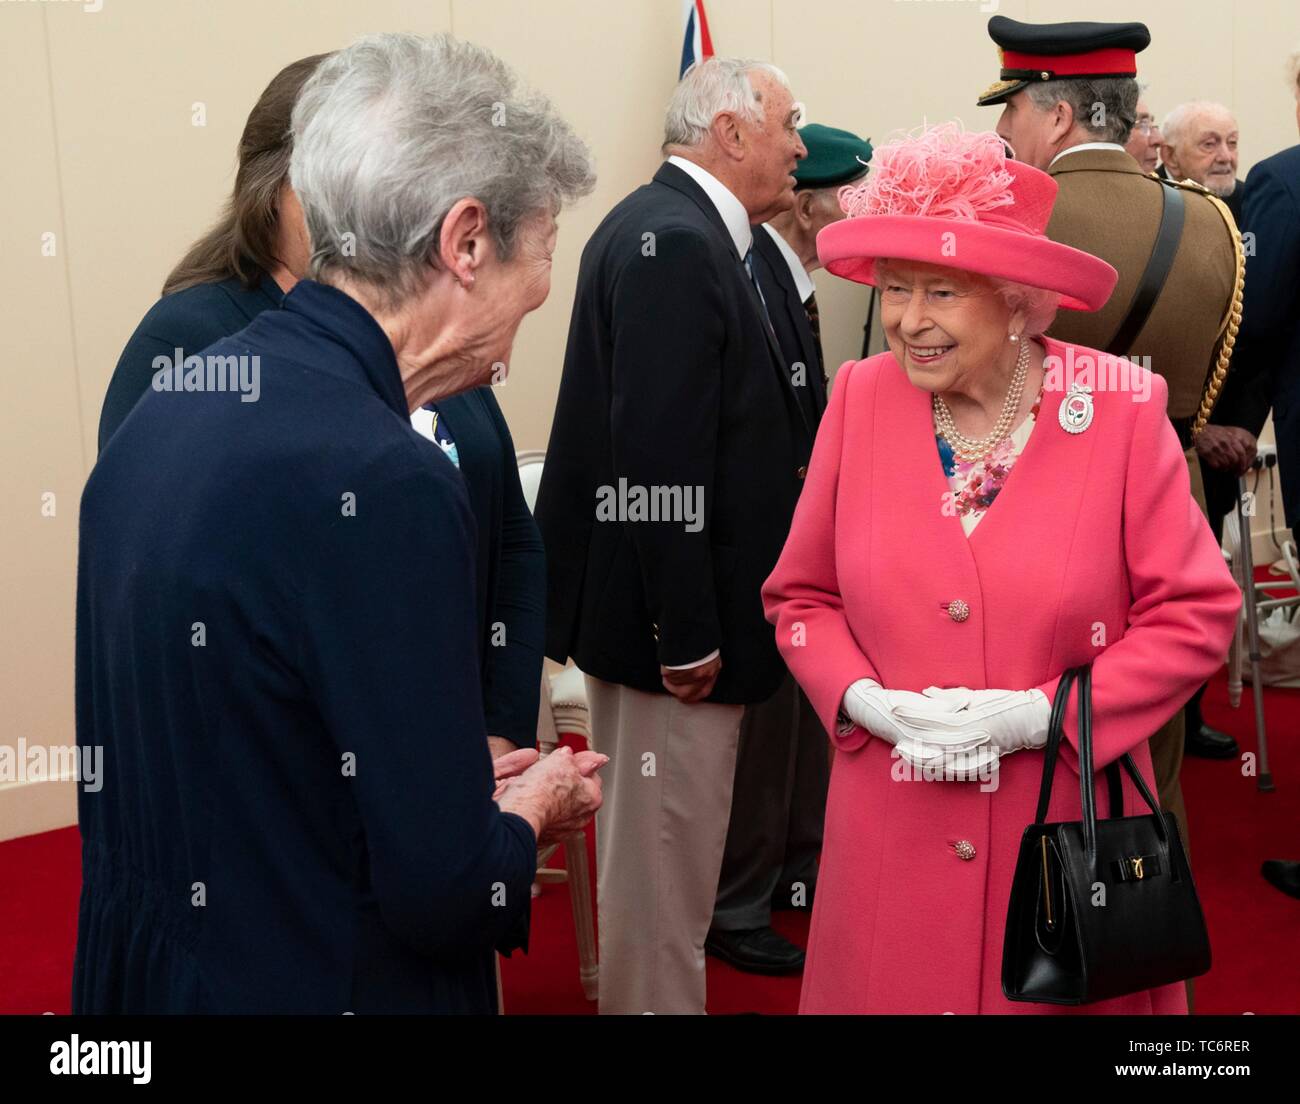 Portsmouth, UK. 05th June, 2019. HRH Queen Elizabeth II meets with WW2 veterans and family members during a D-Day National Commemorative Event at the Southsea Common June 5, 2019 in Portsmouth, England. World leaders gathered on the south coast of England where troops departed for the D-Day assault 75-years-ago. Credit: Planetpix/Alamy Live News Stock Photo